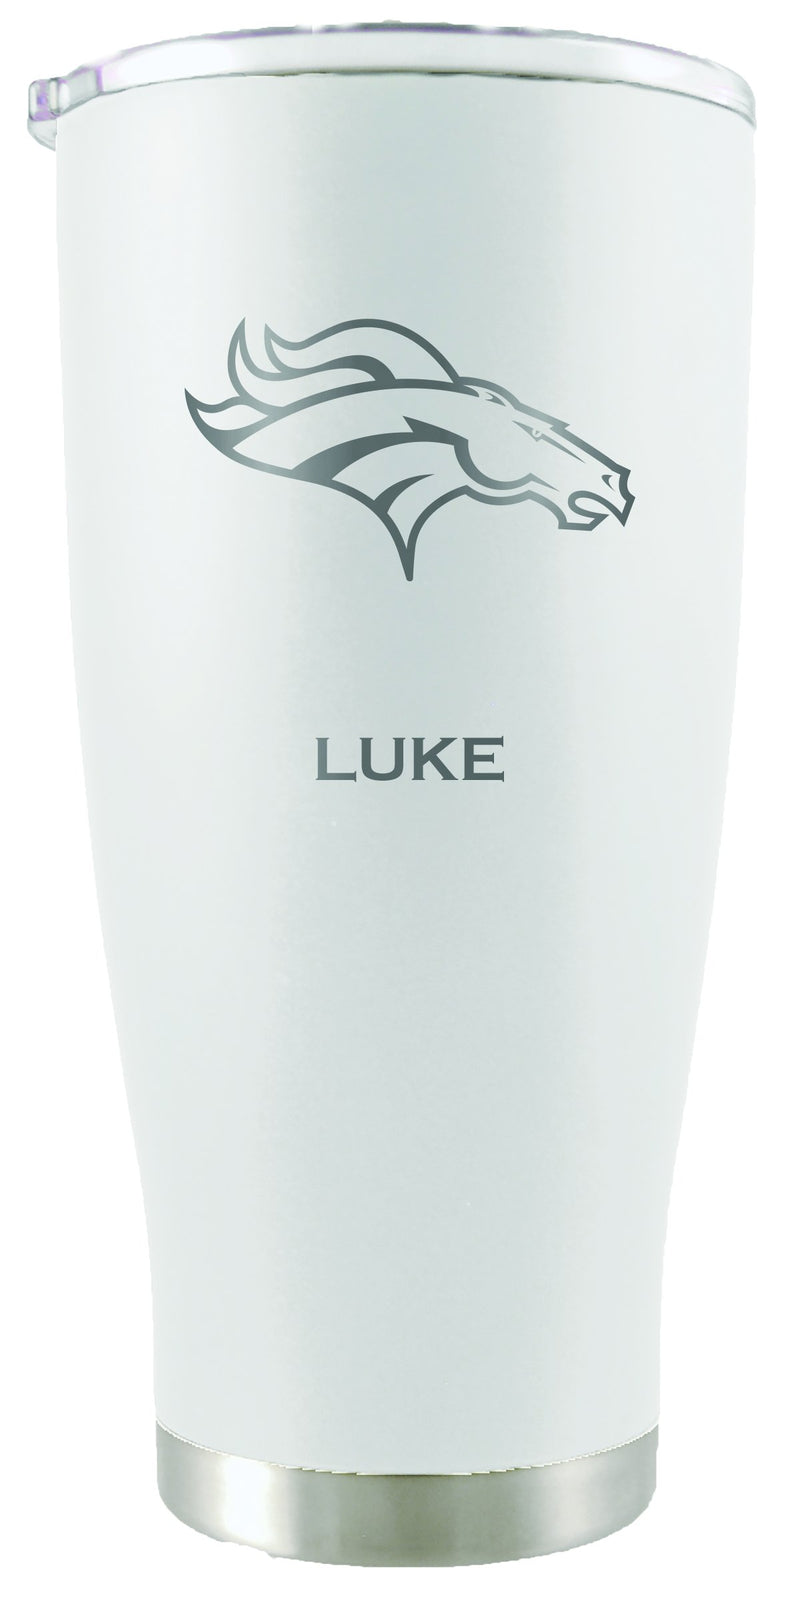 20oz White Personalized Stainless Steel Tumbler | Denver Broncos
CurrentProduct, DBR, Denver Broncos, Drinkware_category_All, NFL, Personalized_Personalized, Stainless Steel
The Memory Company